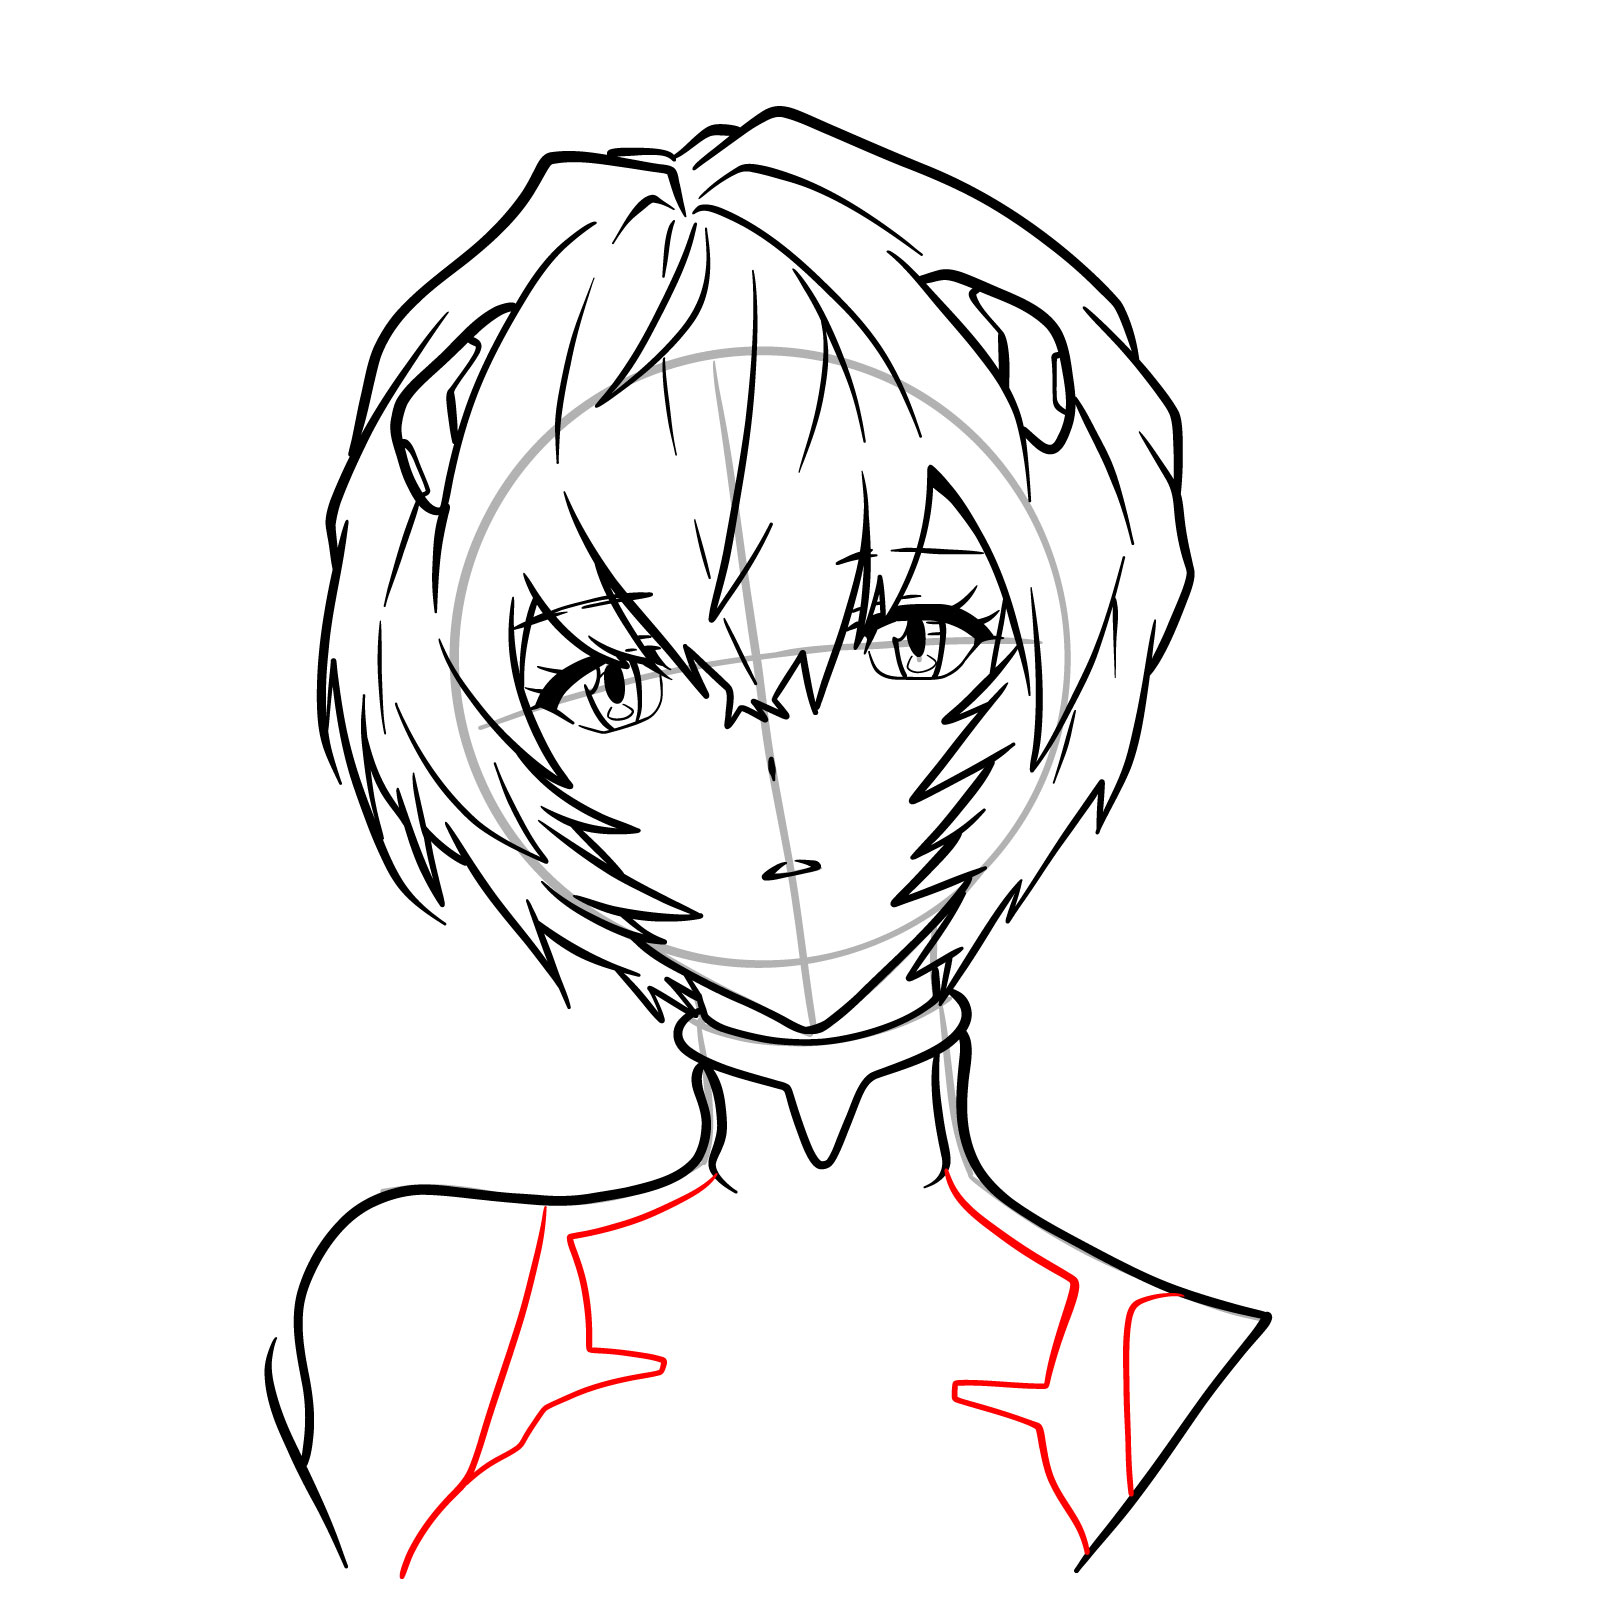 How to draw Rei Ayanami's face - Evangelion - step 19